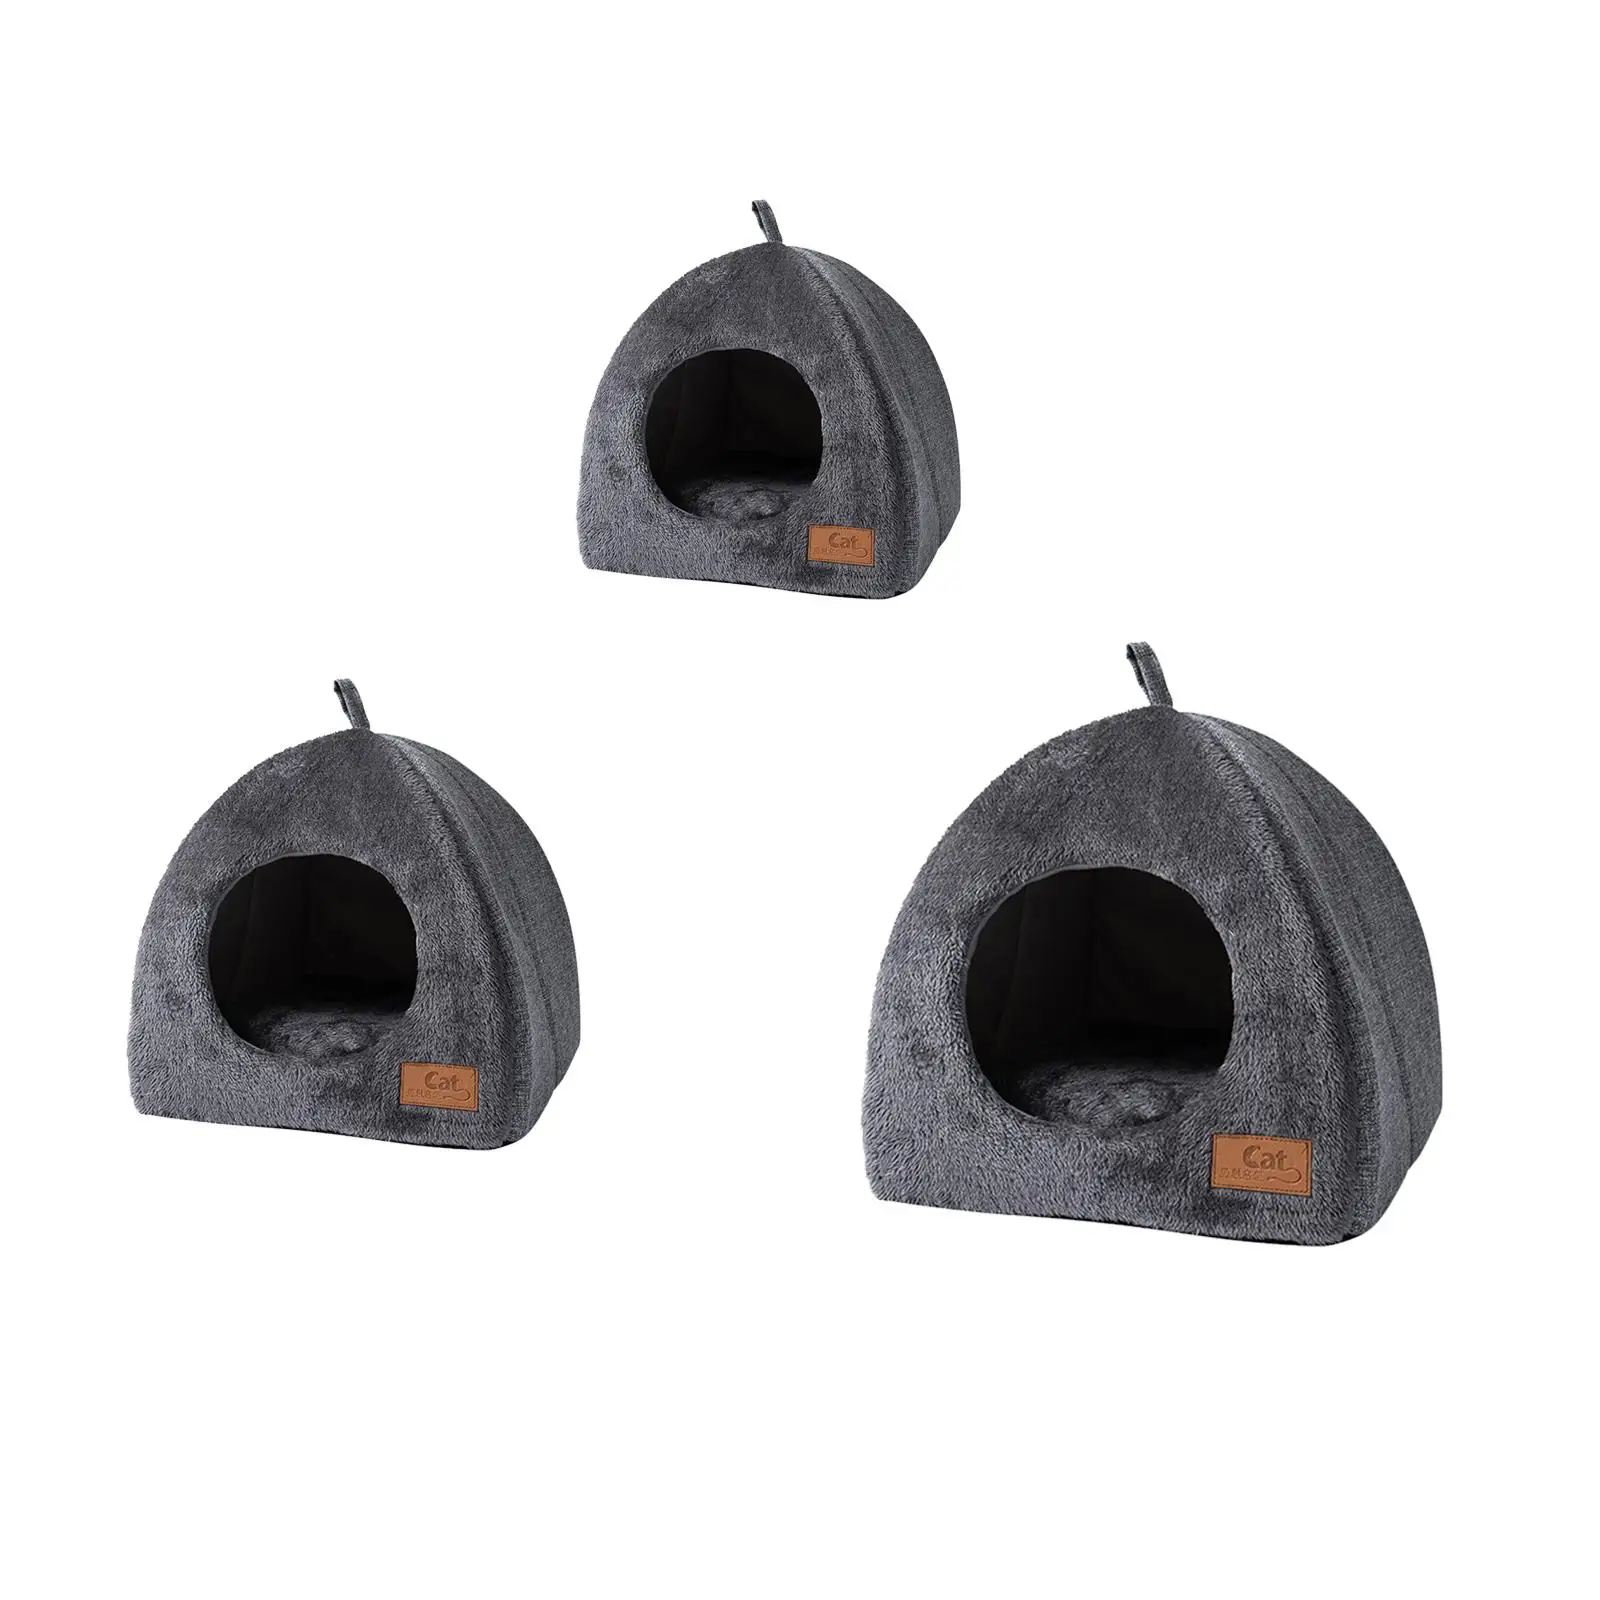 Pad Bed Pet Supplies Sleeping Bed Thick Dog House Puppy Mat Kennel Pad Cats Indoor Cats Rabbits Puppy Kitten